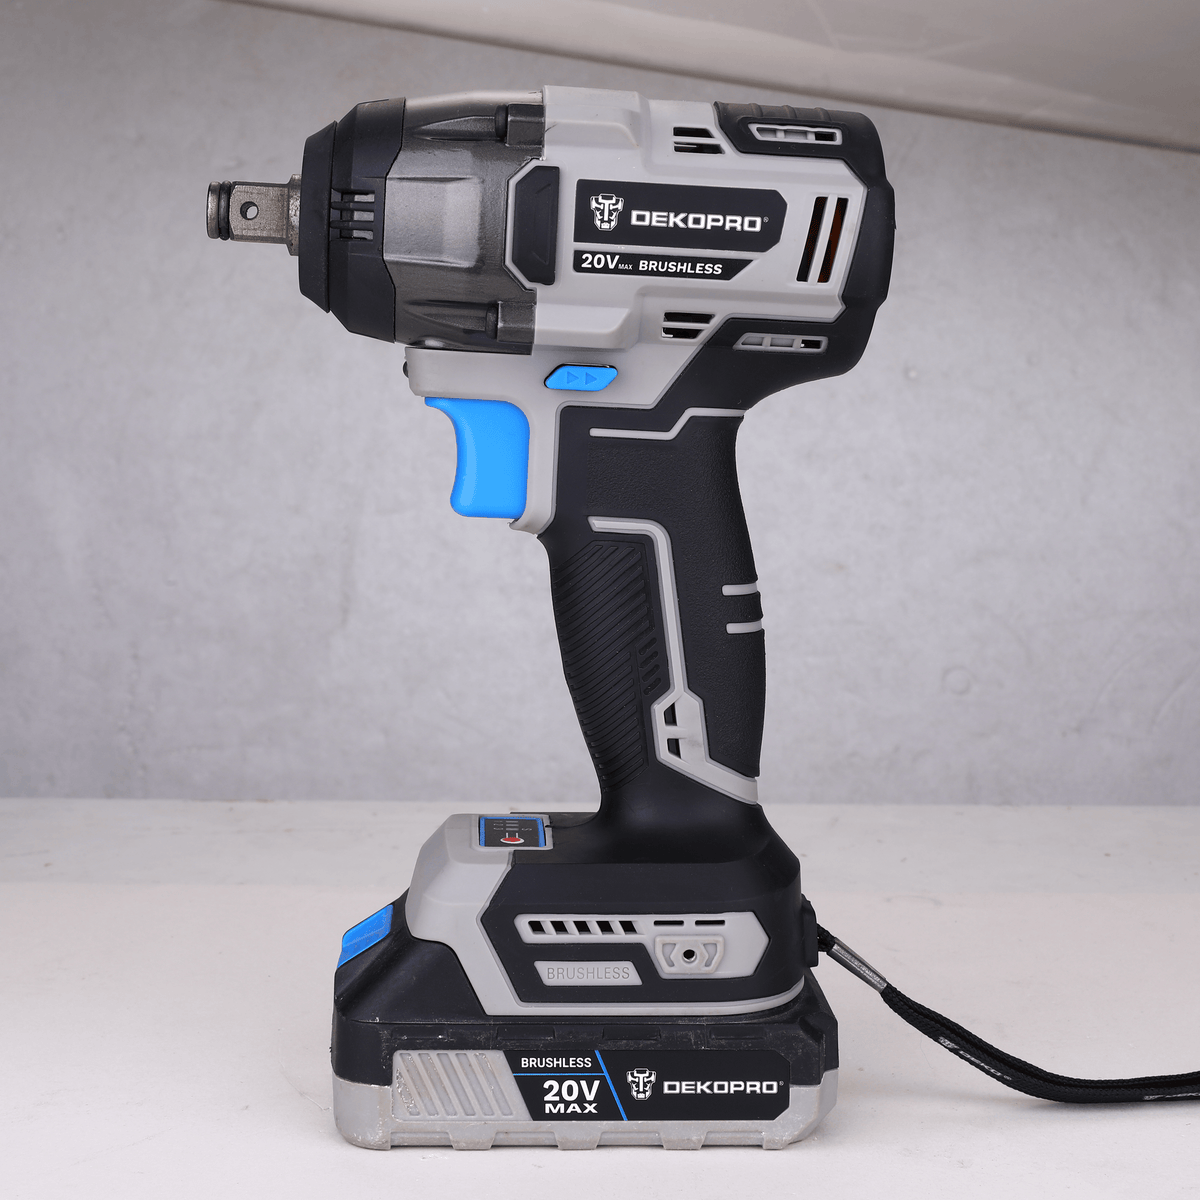 DEKOPRO 20V MAX Electric Cordless Brushless Impact Wrench DKBW20XL01